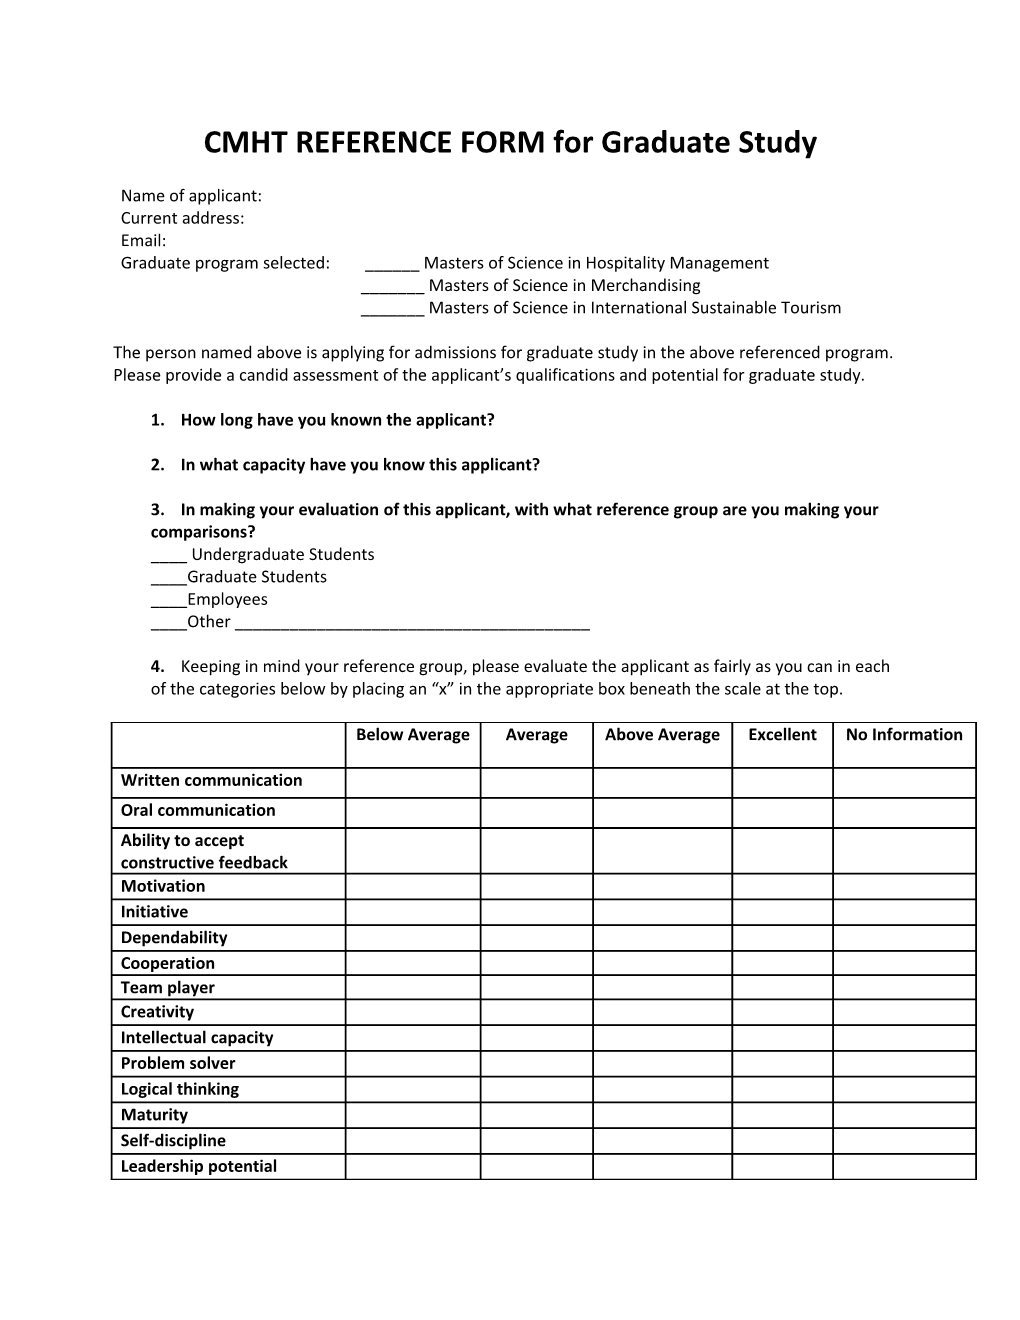 CMHT REFERENCE FORM for Graduate Study